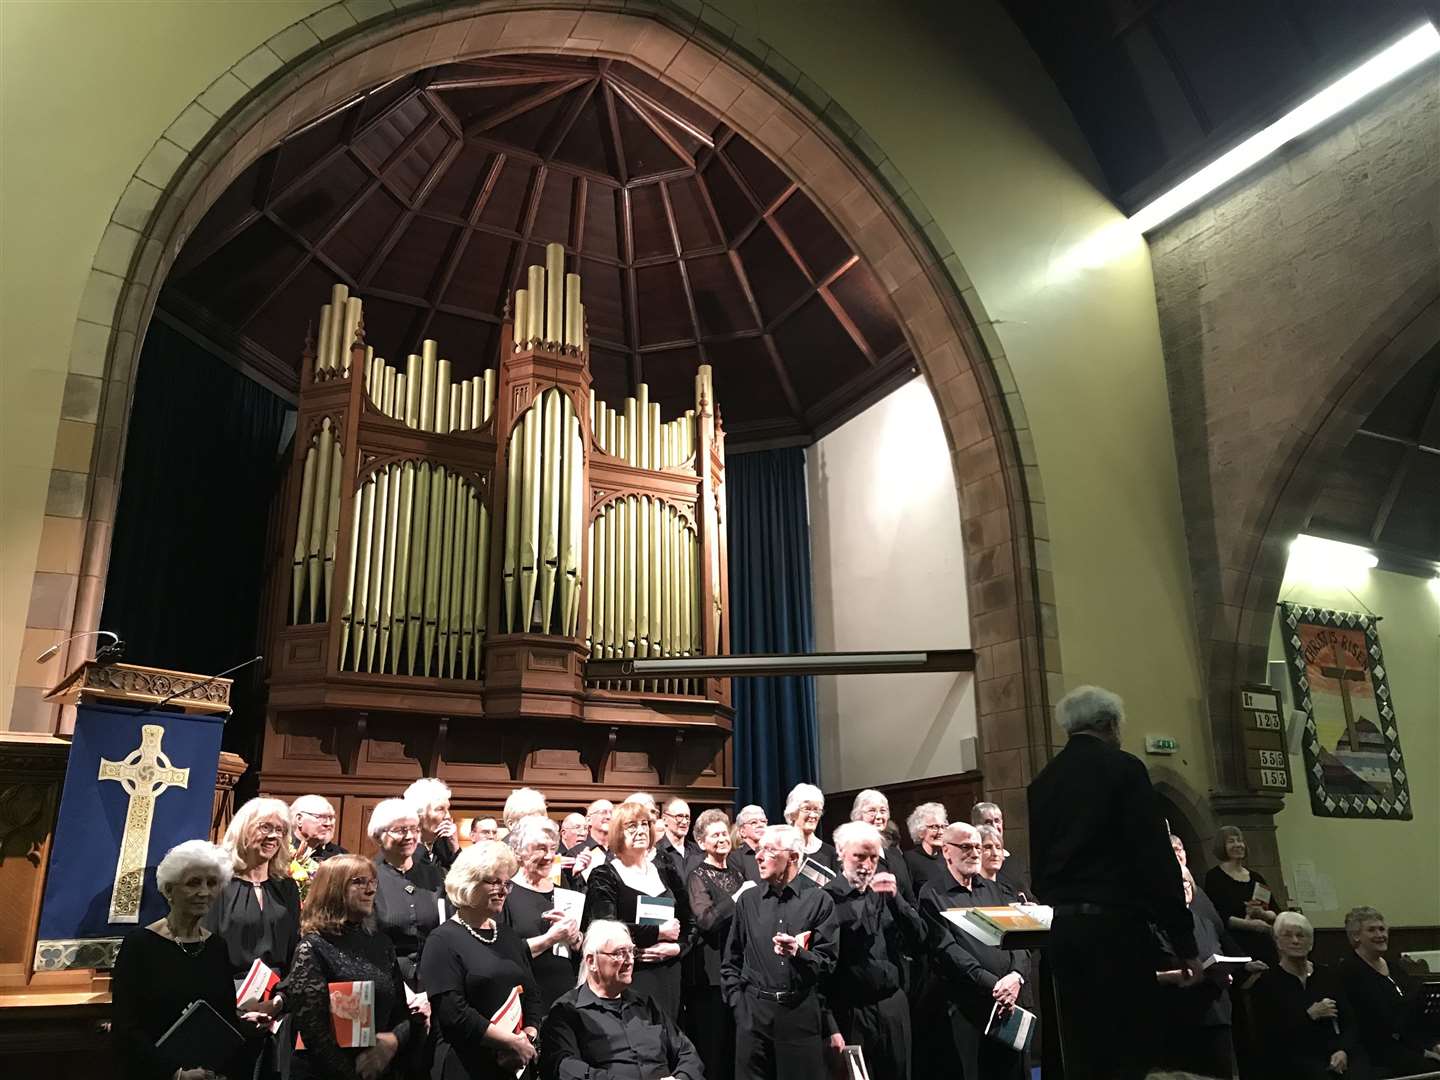 Inverness Choral Society performing at the Ness Bank Church at their Spring Concert back in March.